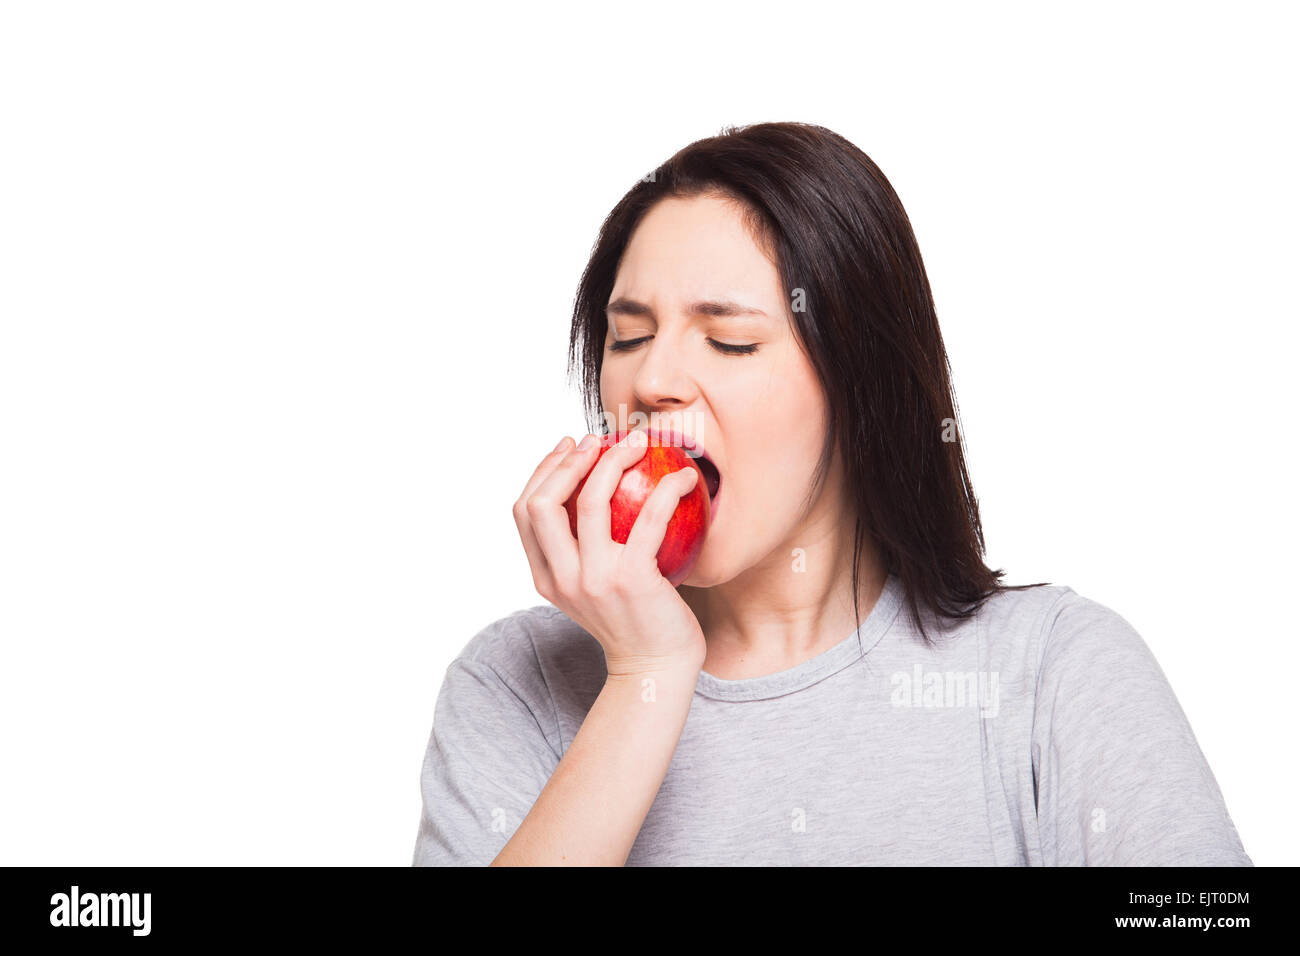 Young woman eating an apple isolated on white Stock Photo